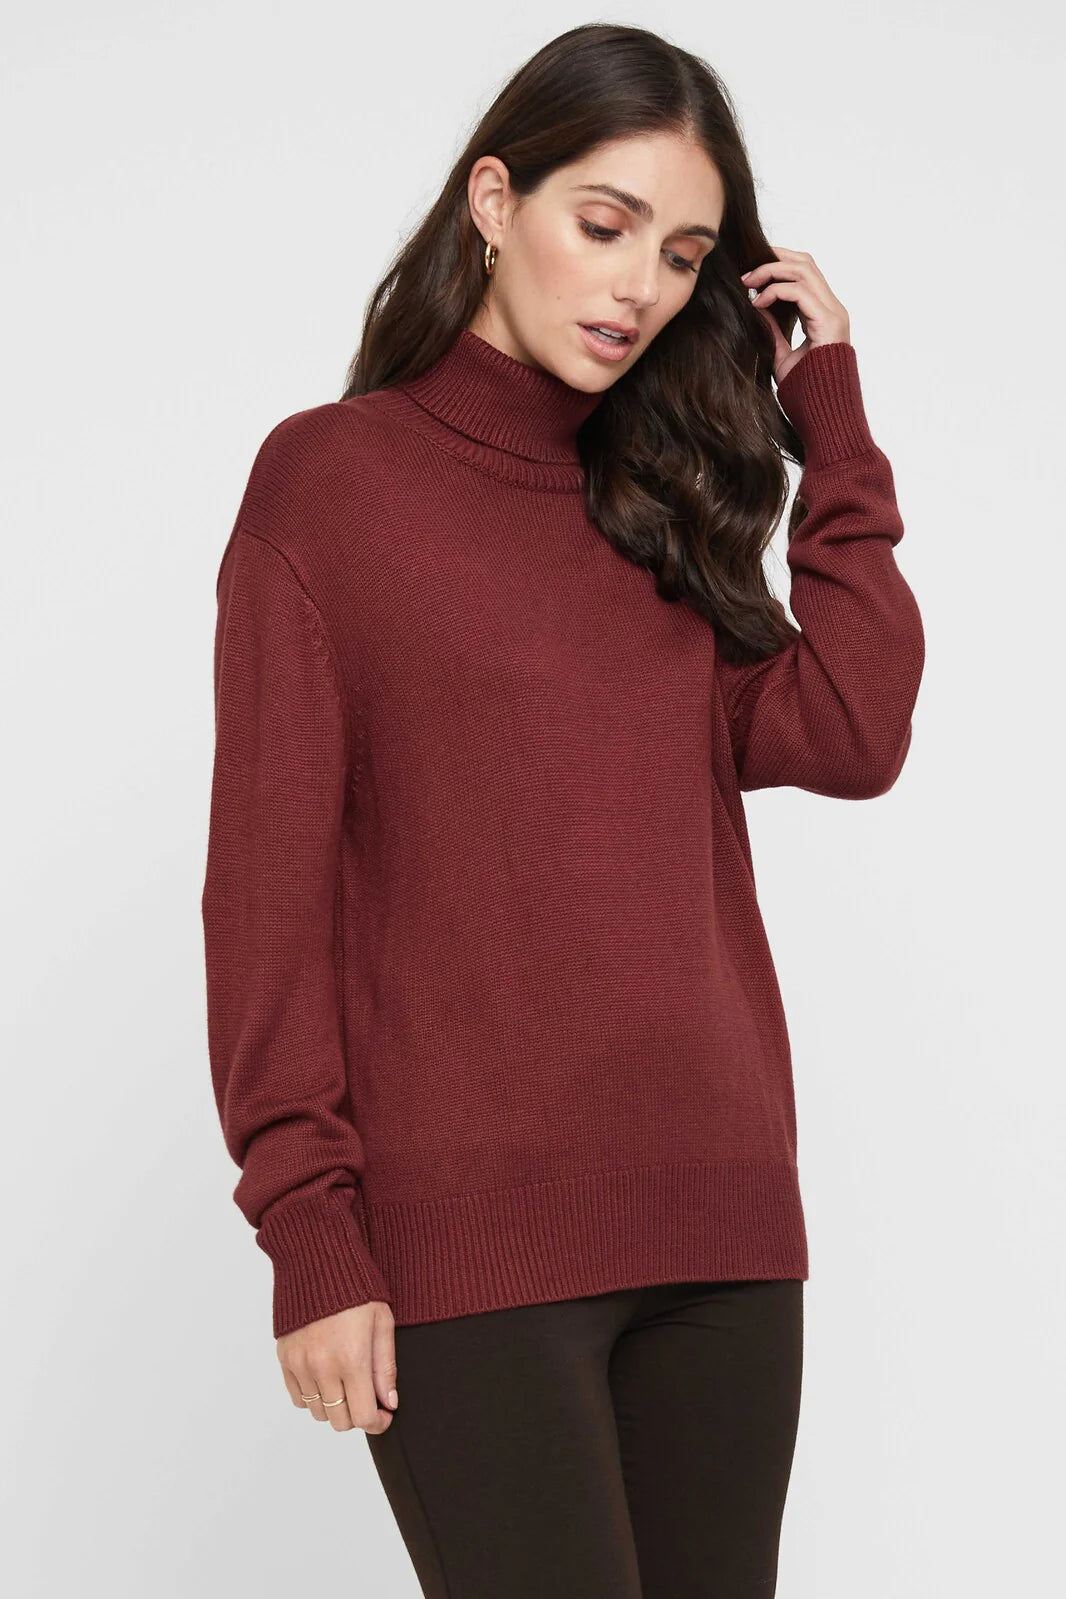 "Bamboo women's jumper: Turtle neck design offers versatility and sustainability in fashion."